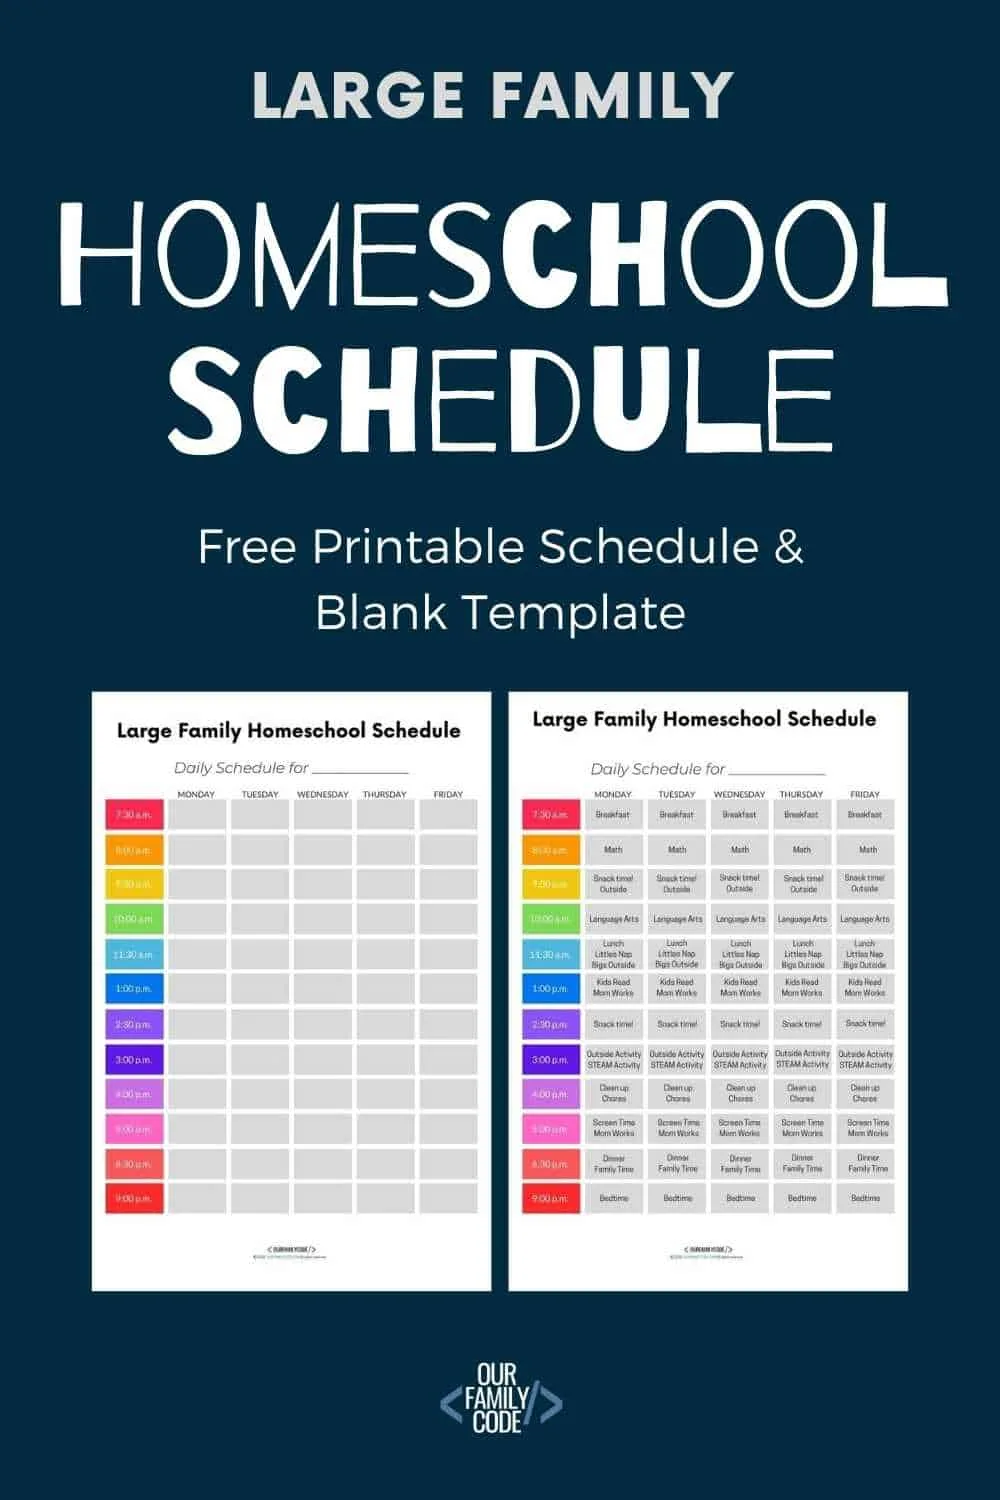 homeschool schedule for large family